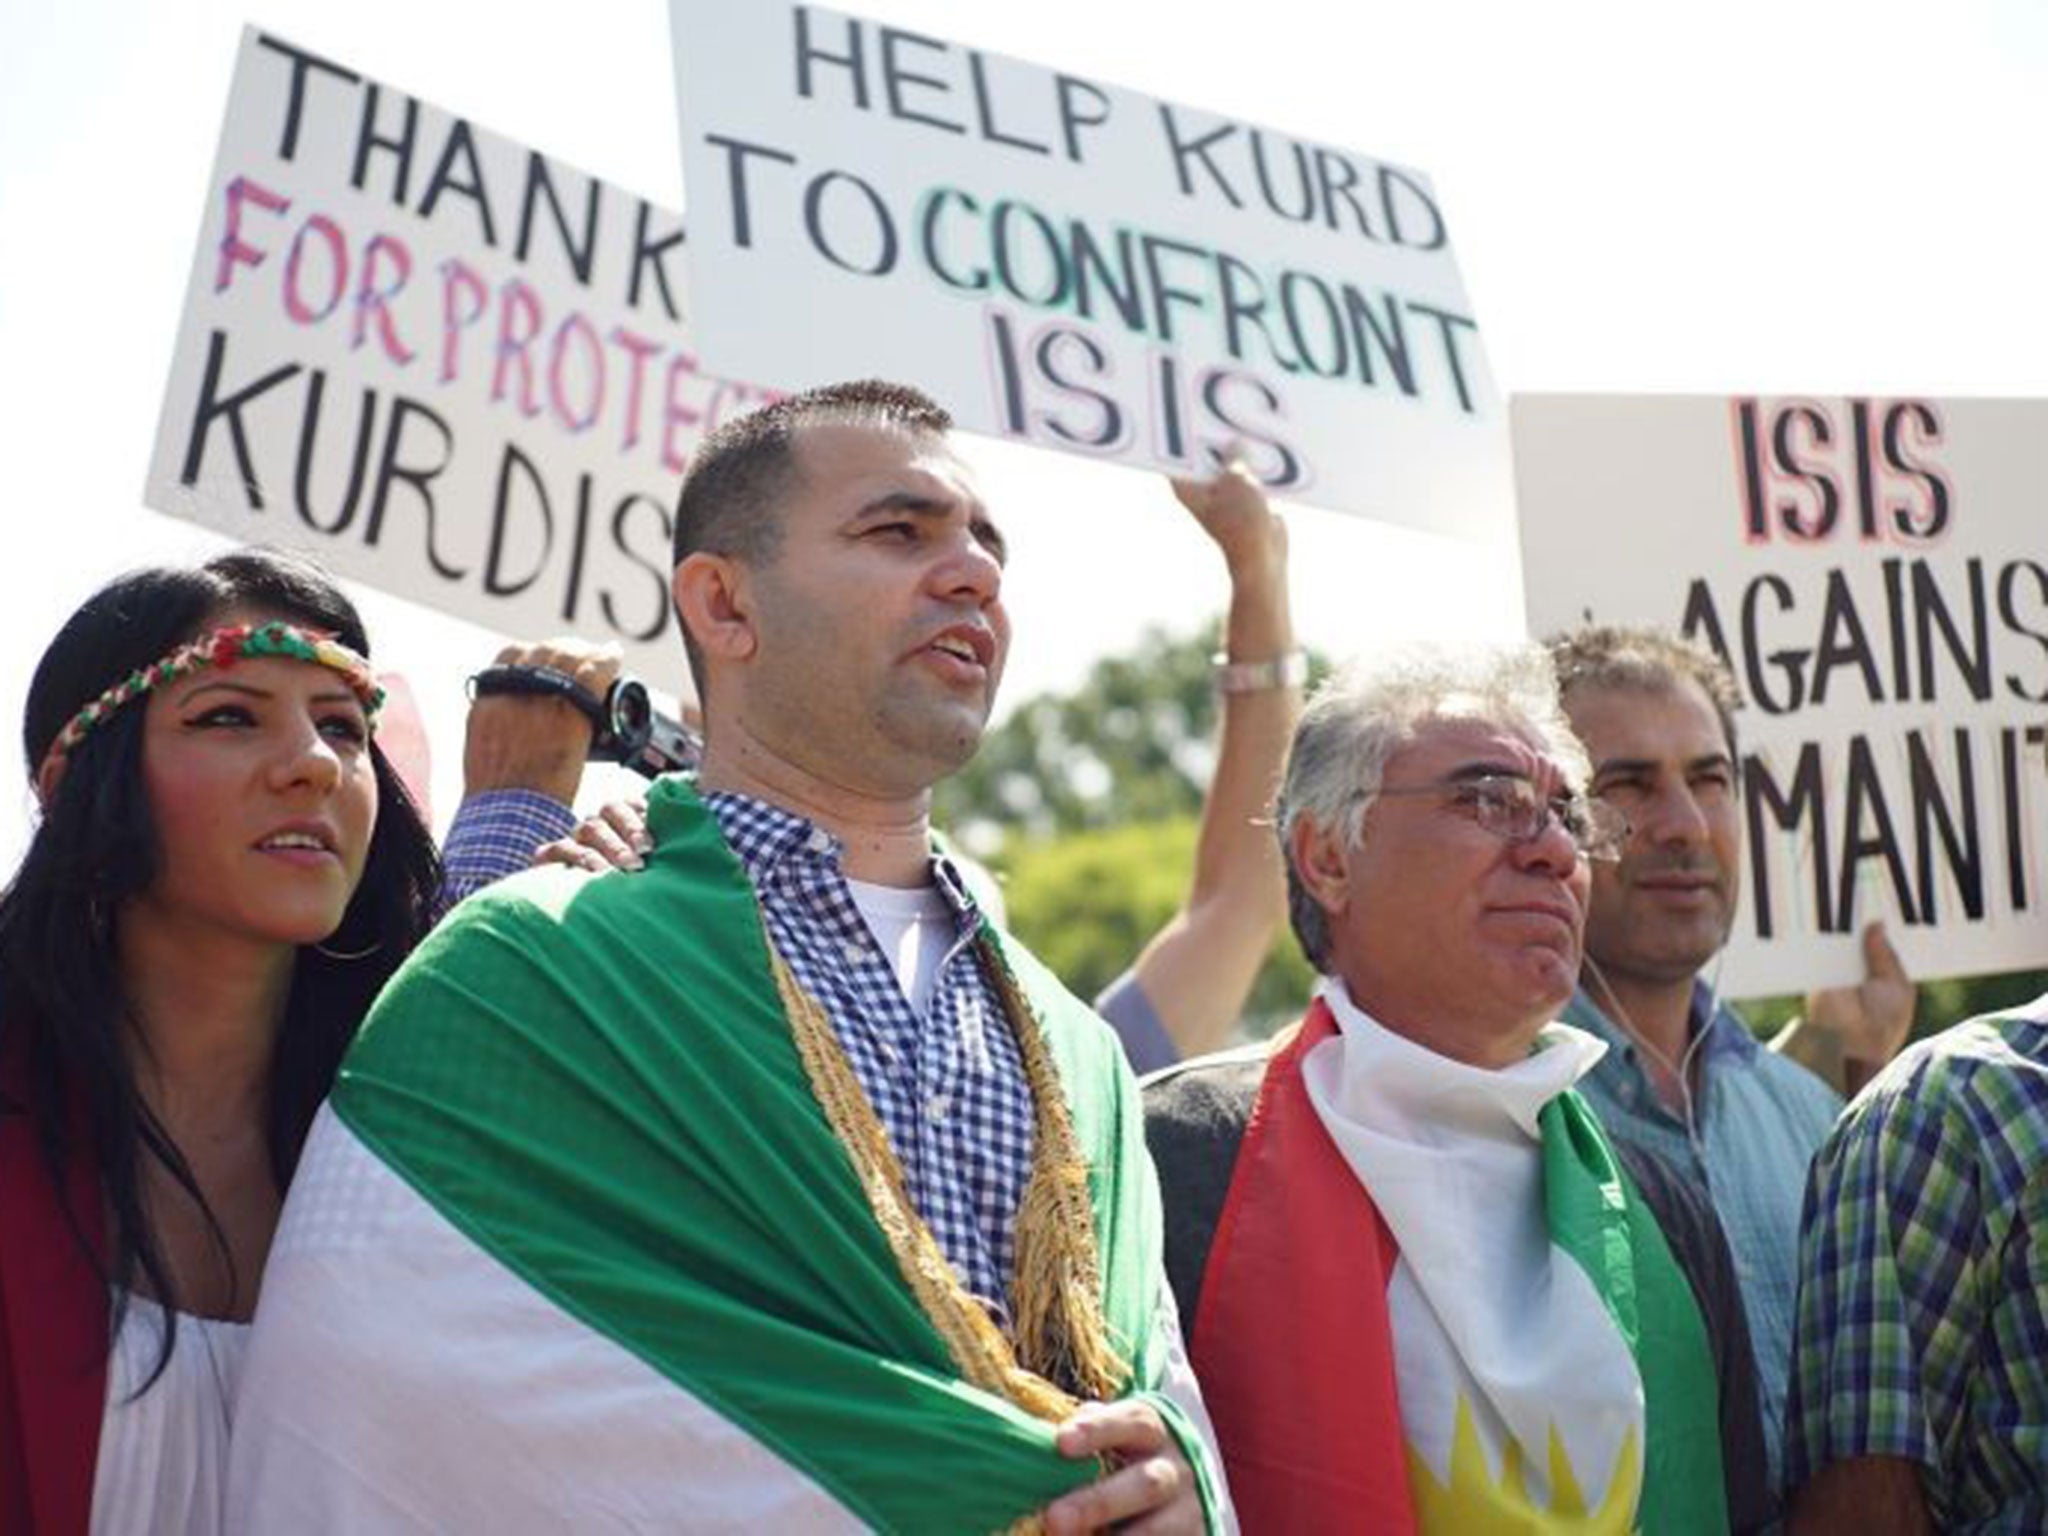 Demonstrators at a rally supporting Kurdistan hold placards protesting against ISIS in front of the White House on August 16, 2014 in Washington, DC.